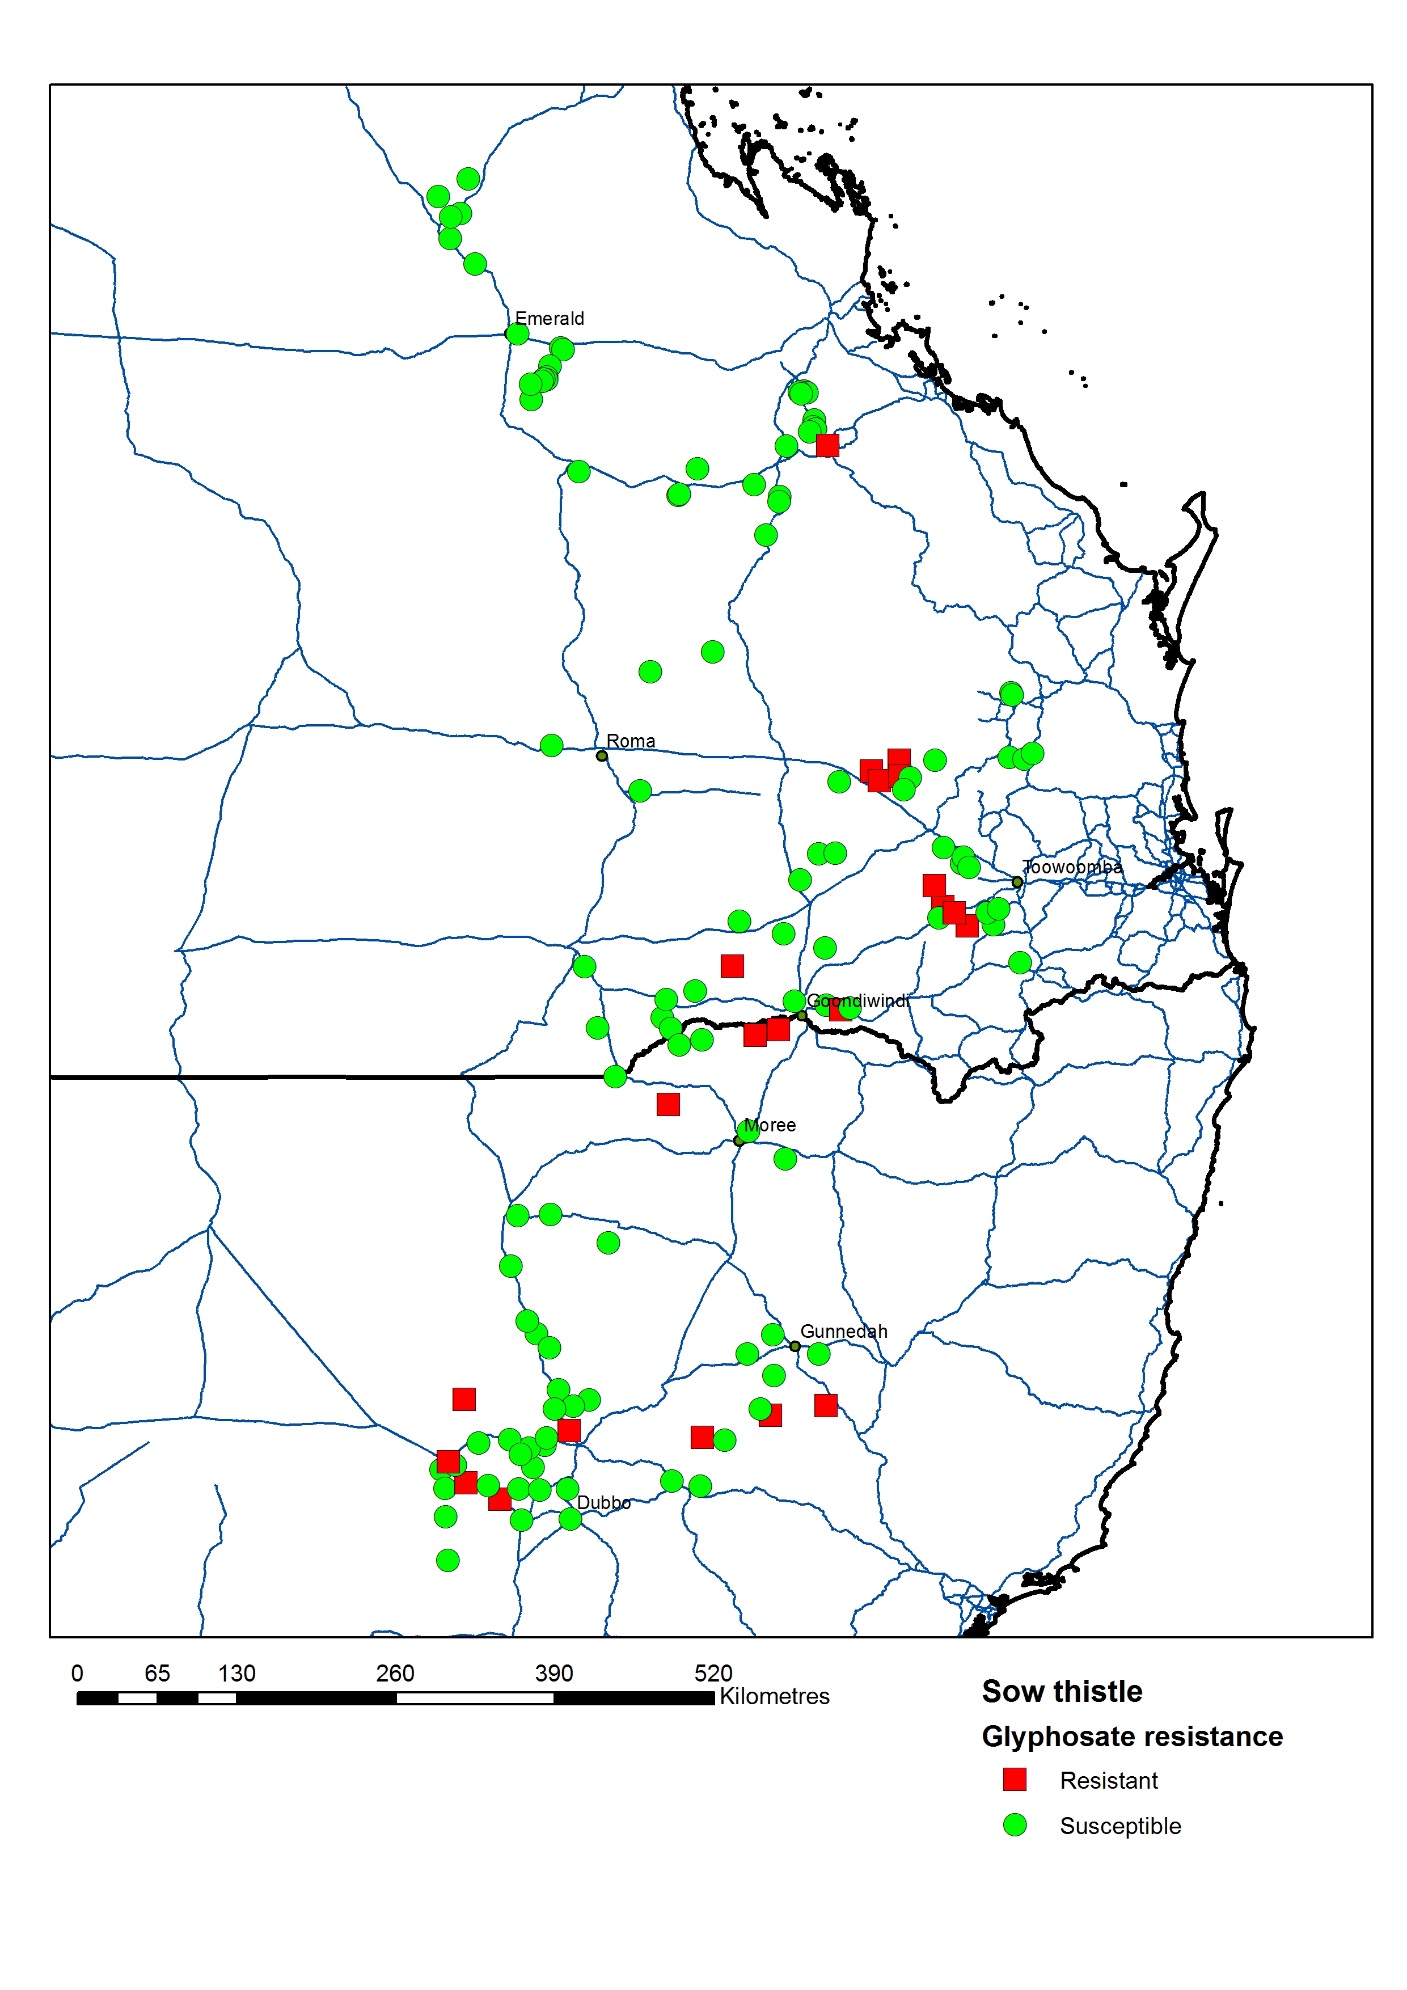 This is a map showing glyphosate resistant (red squares) and susceptible (green dots) sowthistle  (Sonchus oleraceus) populations across the northern grain cropping region. Results to date have shown that out of 154 populations tested, 26 have been confirmed resistant to glyphosate (≥20% survival) while another 17 have been identified as developing resistance (11-19% survival). The identified resistant populations are distributed throughout the northern cropping region.